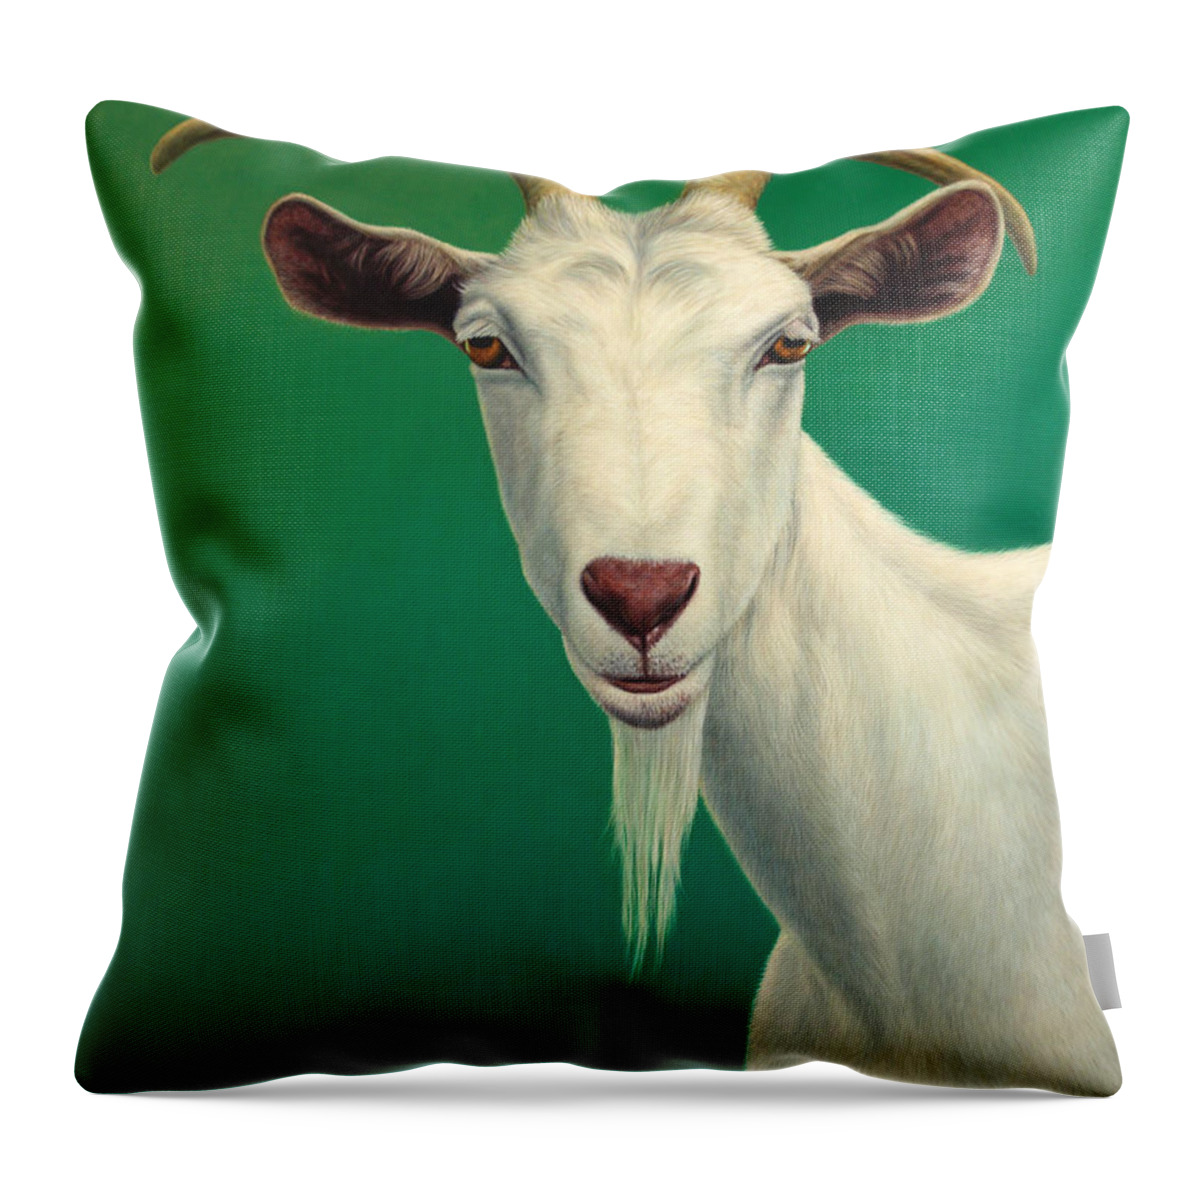 #faatoppicks Throw Pillow featuring the painting Portrait of a Goat by James W Johnson